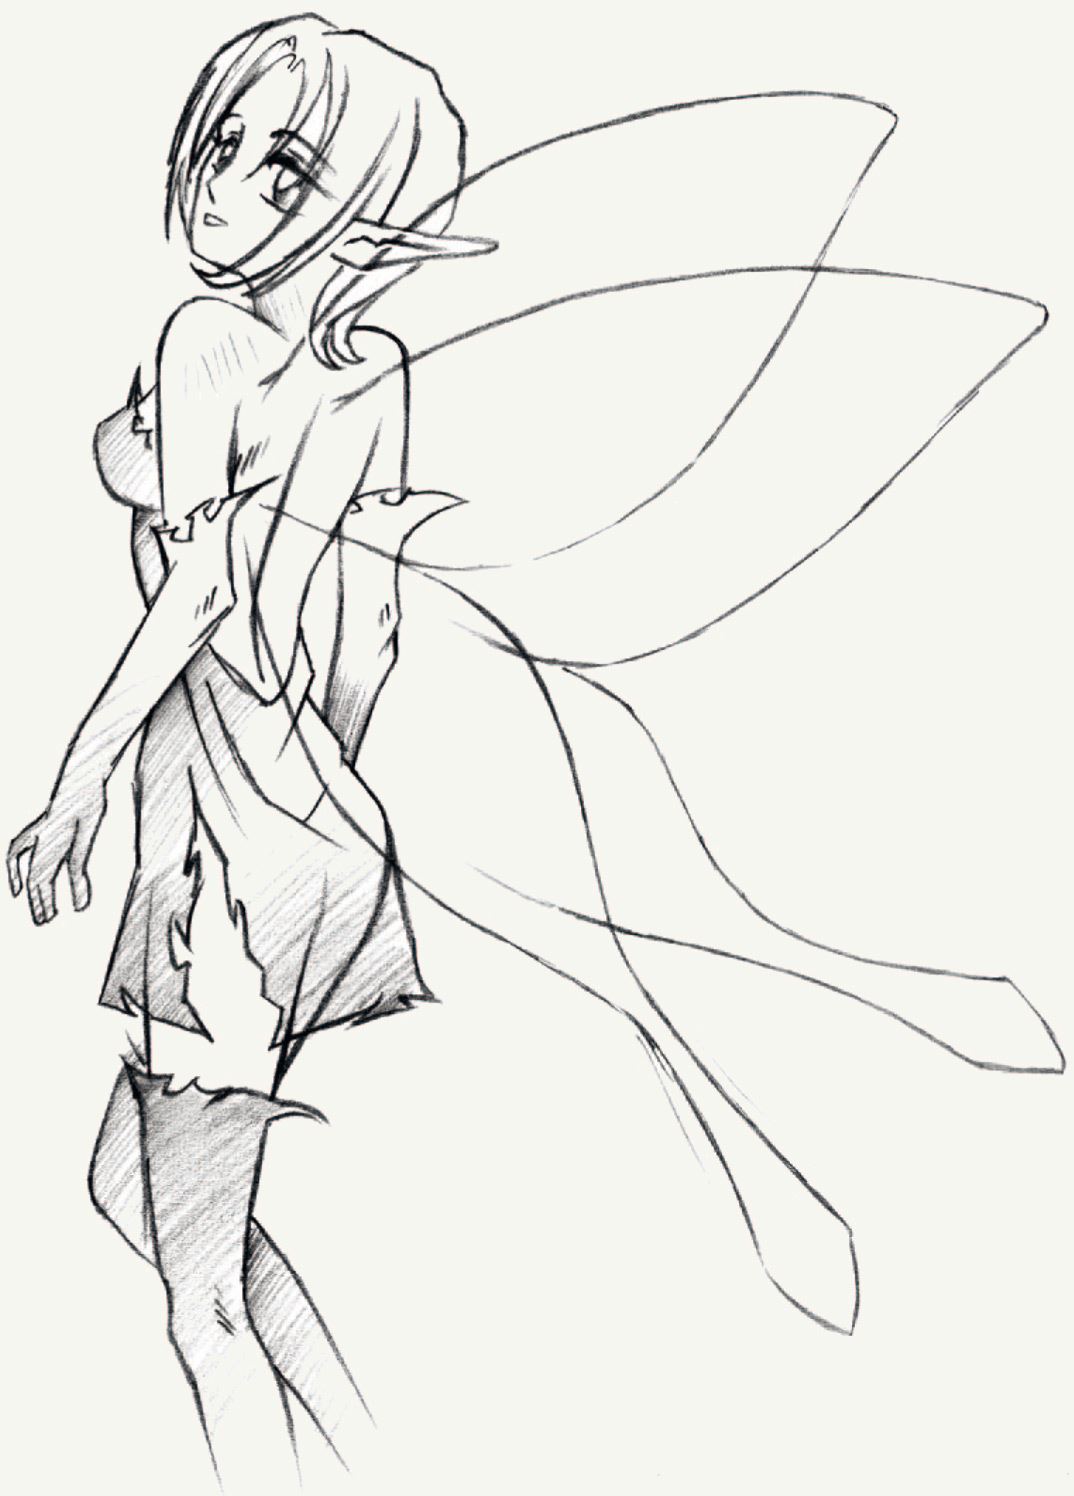 Anime Art - Step-by-step instructions: Fairy - Step 4 - completed your preliminary sketch